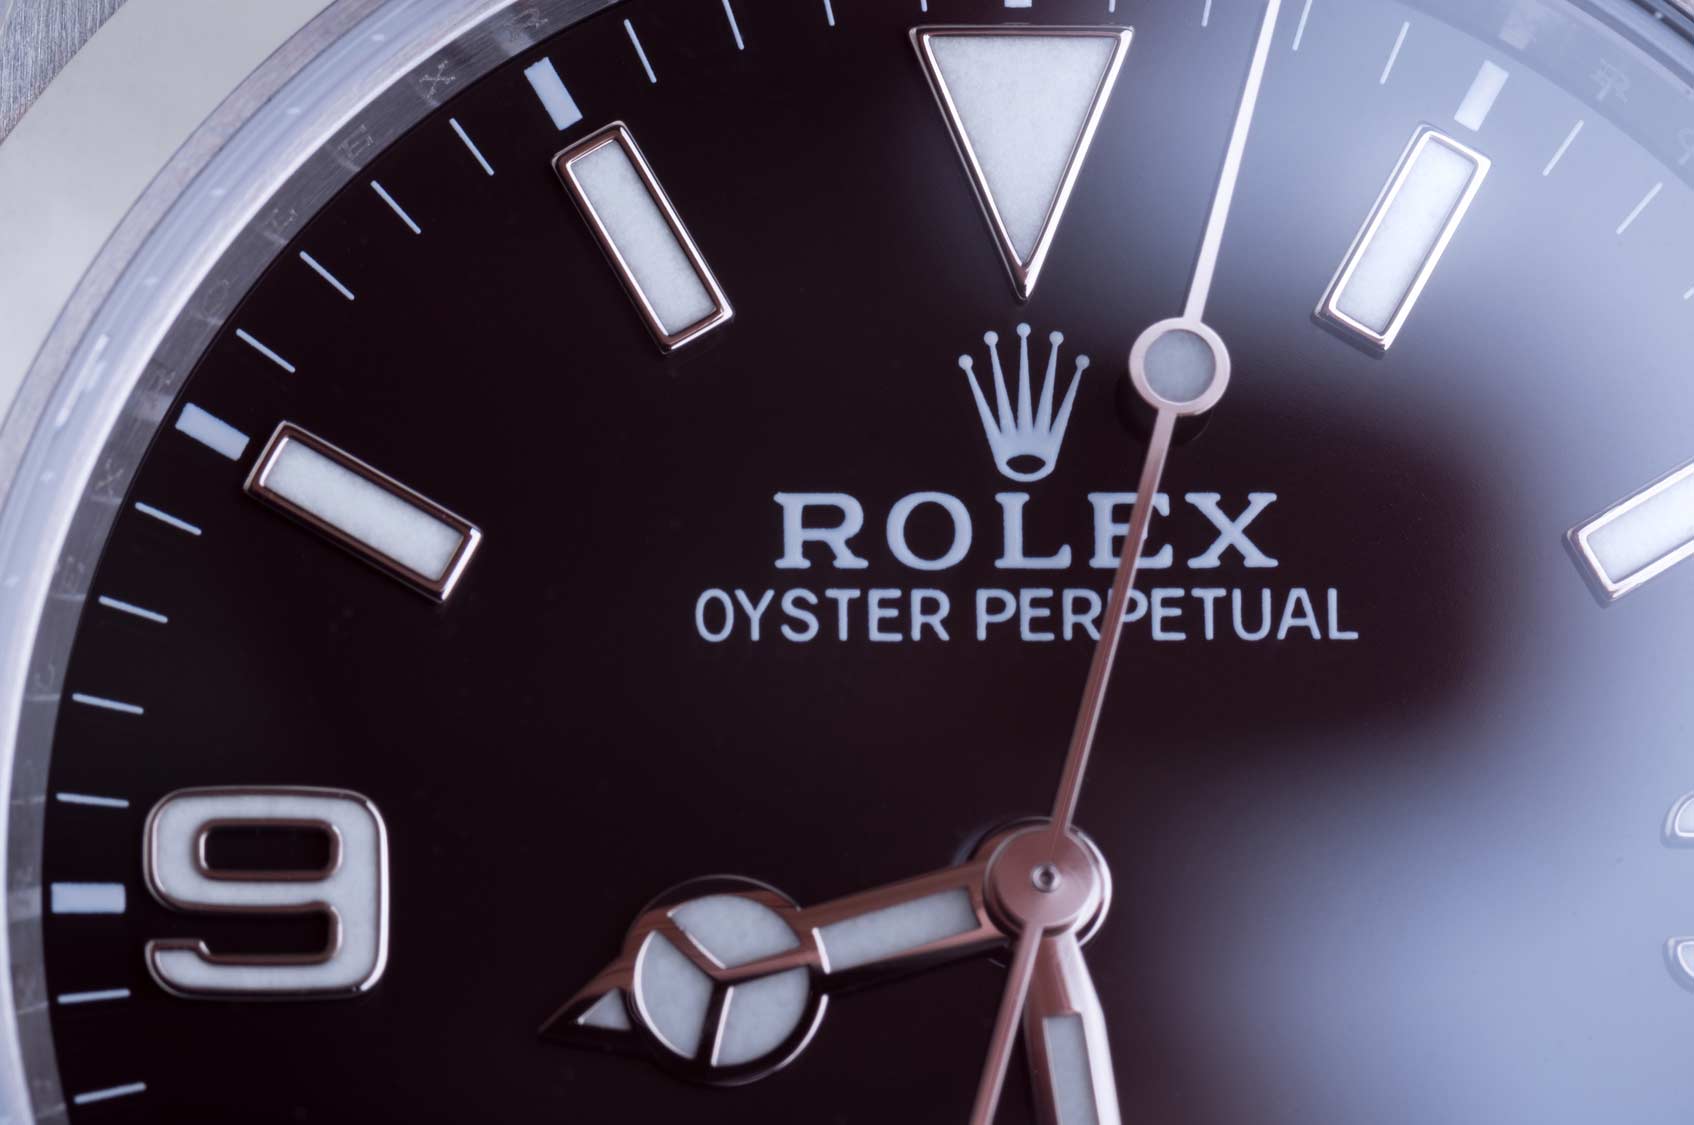 The History of the Rolex Logo and Brand